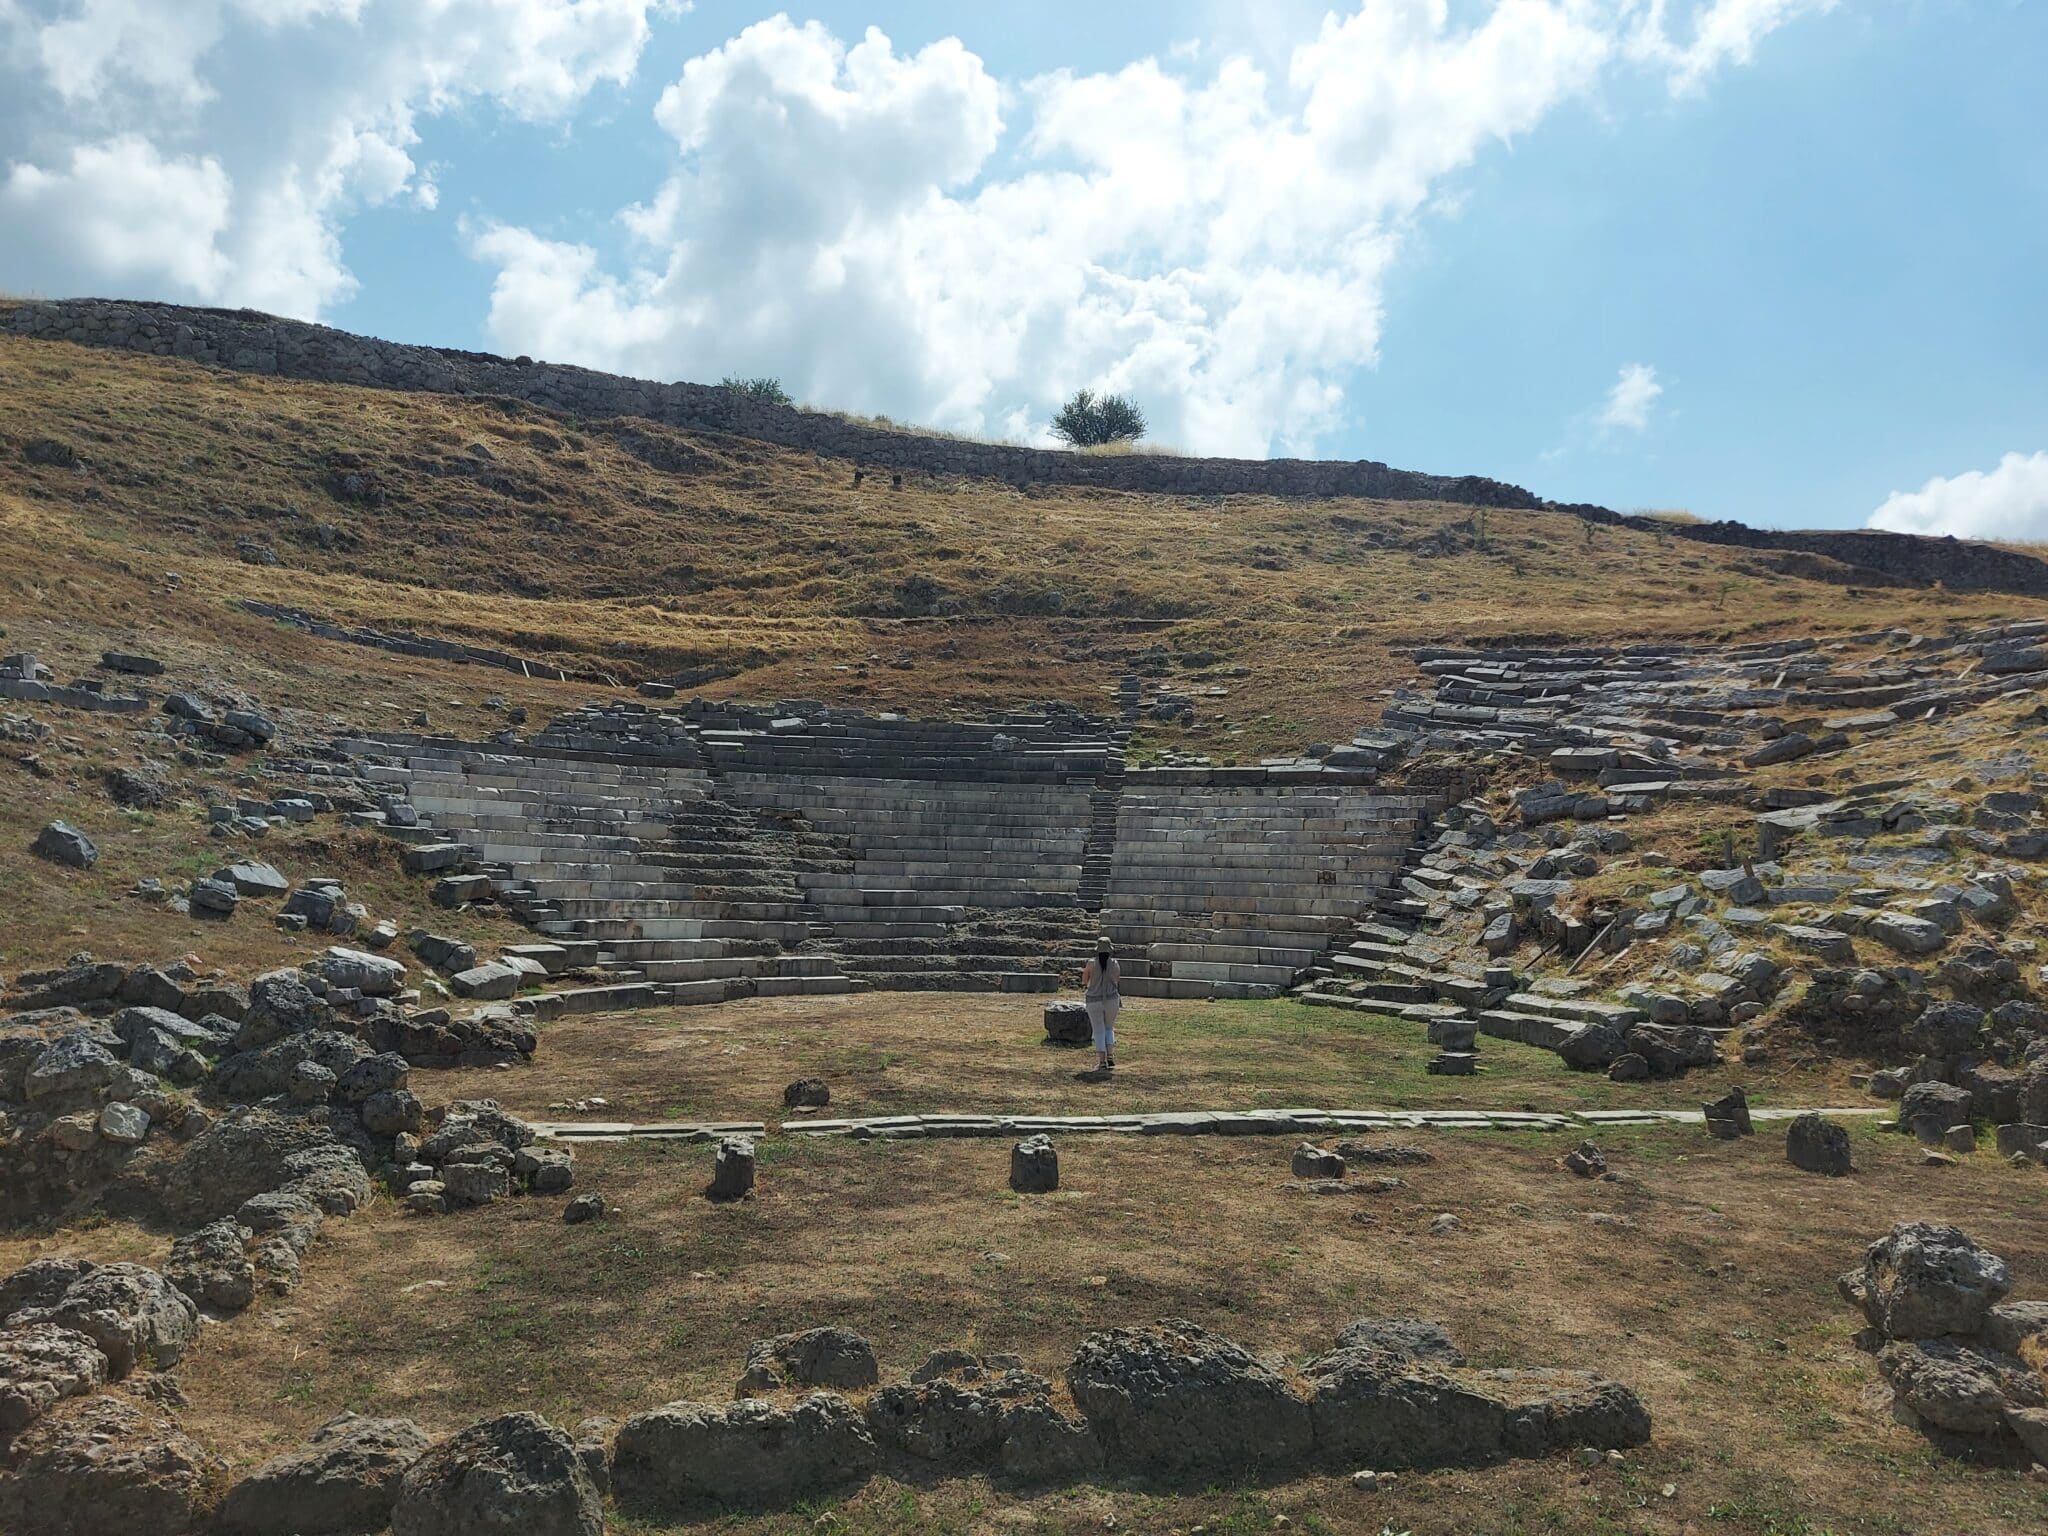 A Tour In The Ancient Theaters Of Epirus: